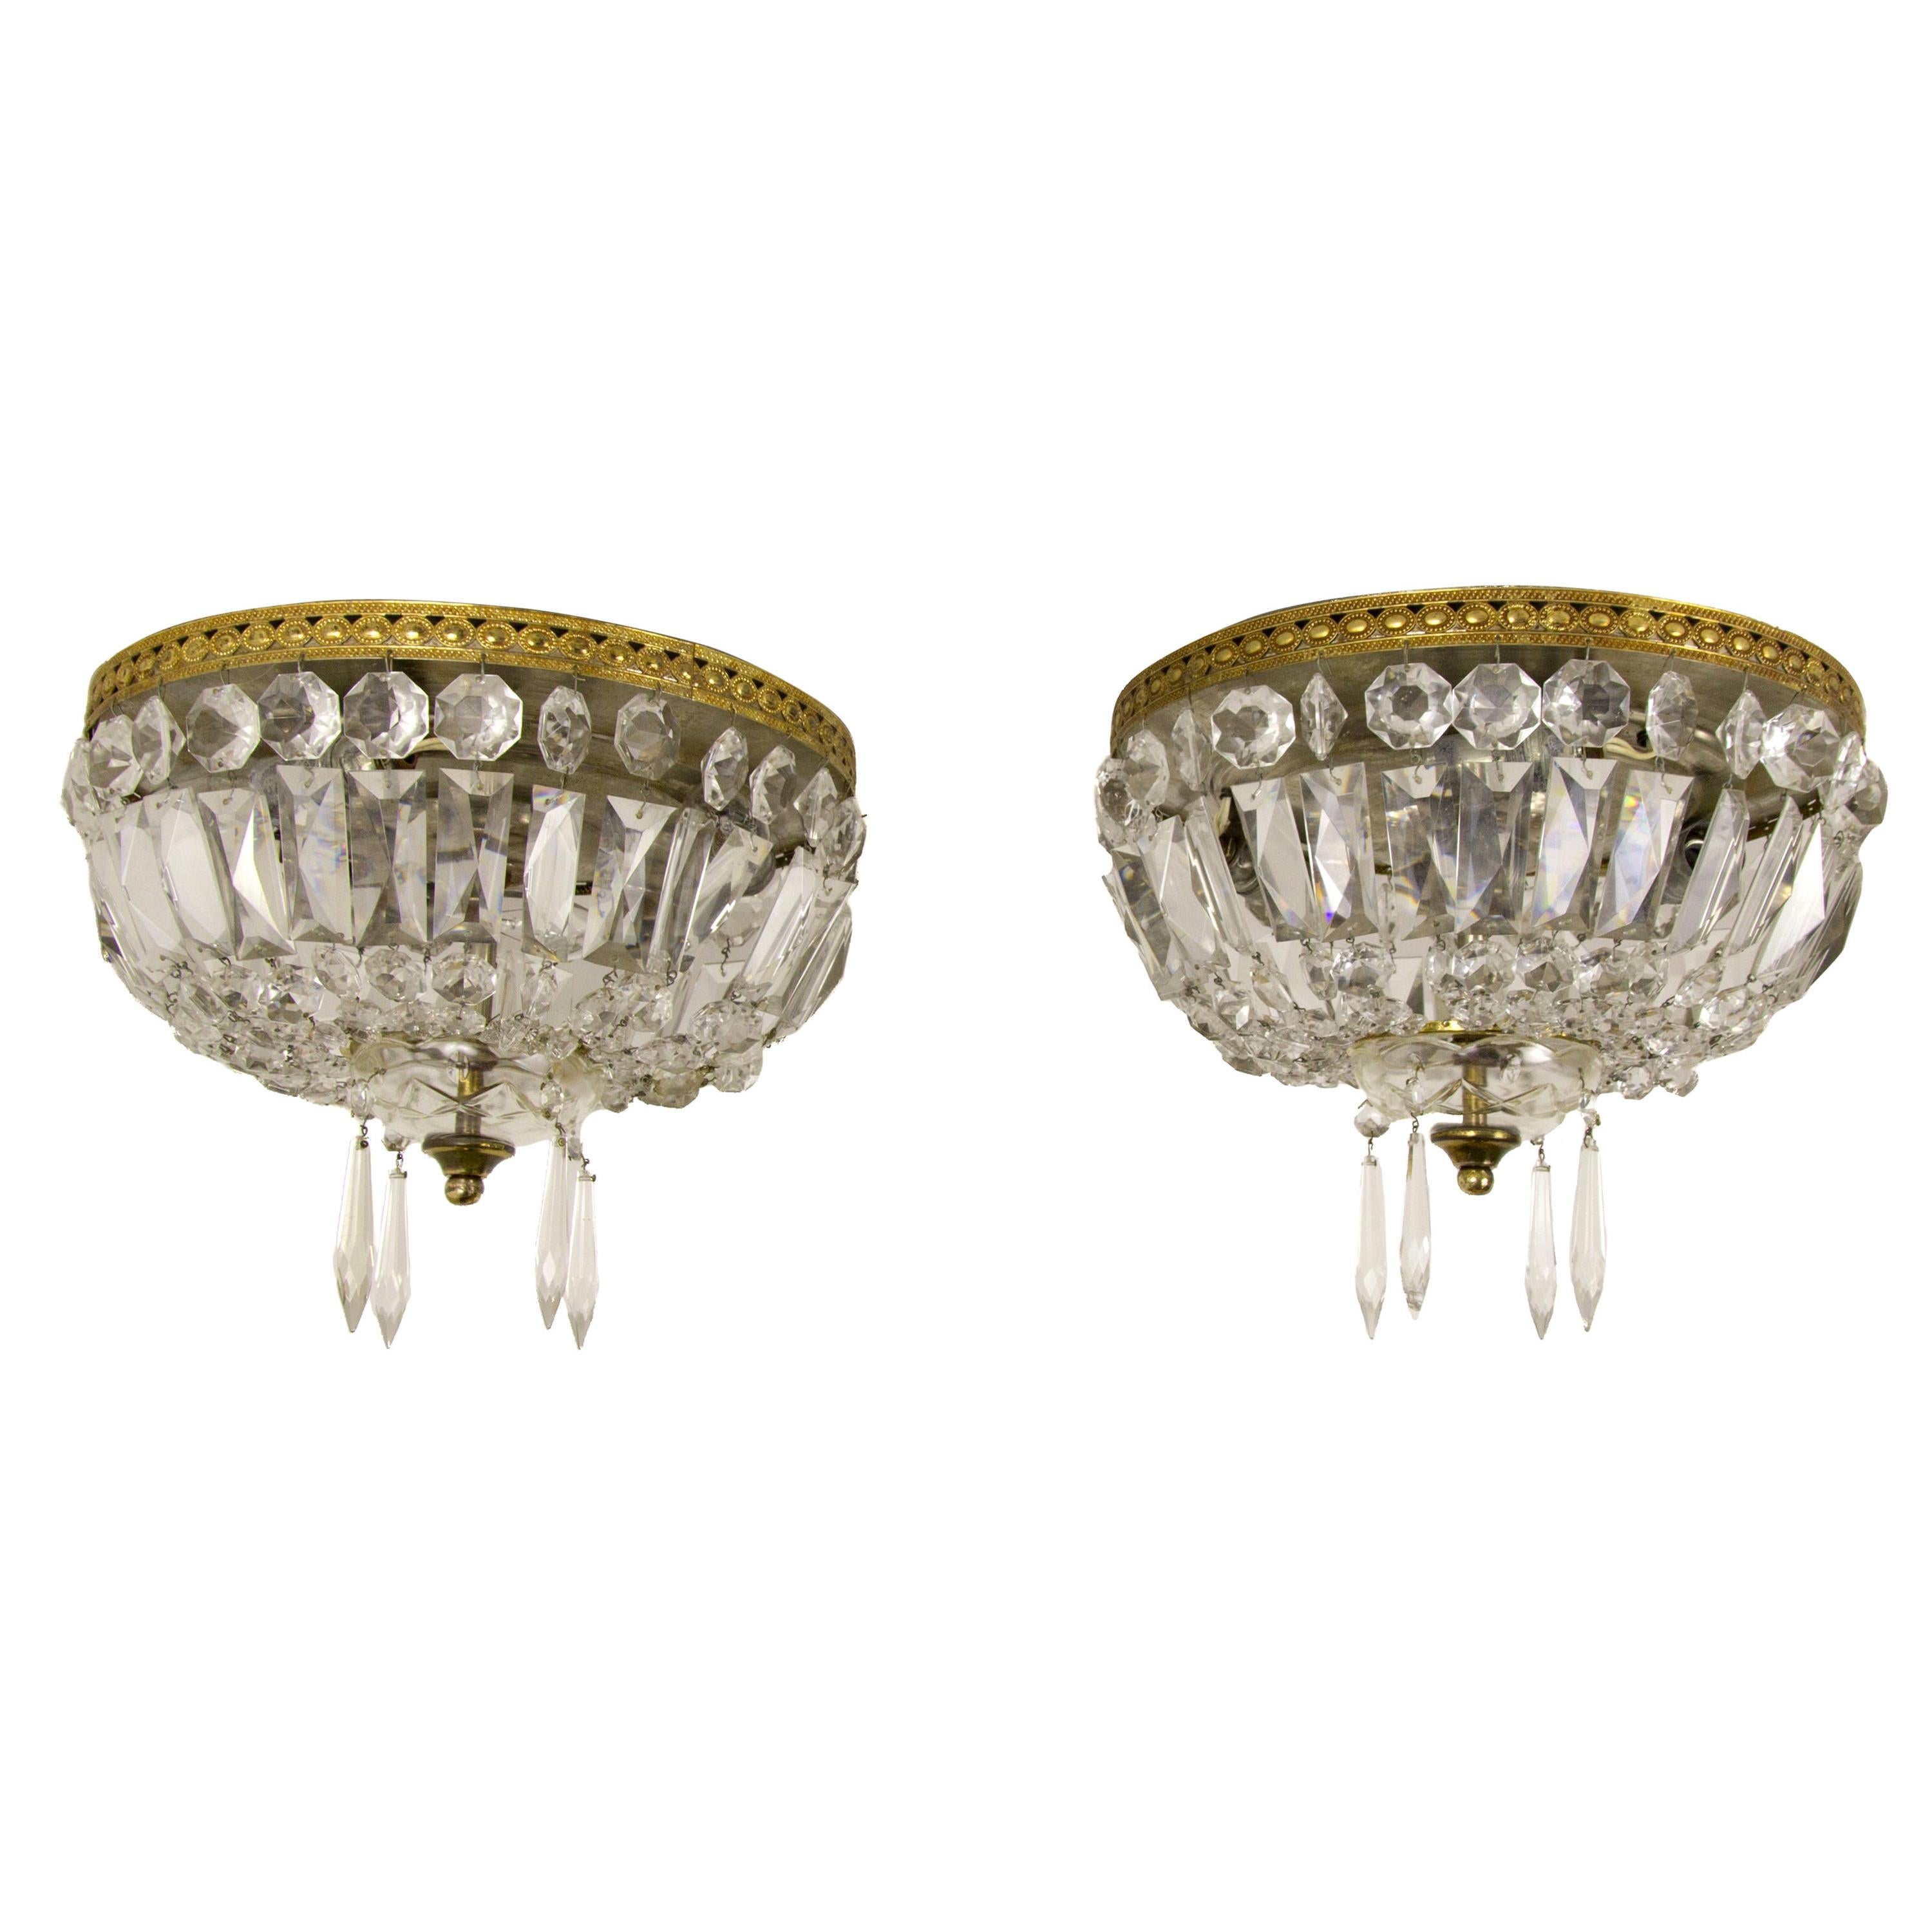 Pair of French Vintage Crystal and Brass Three-Light Ceiling Fixtures